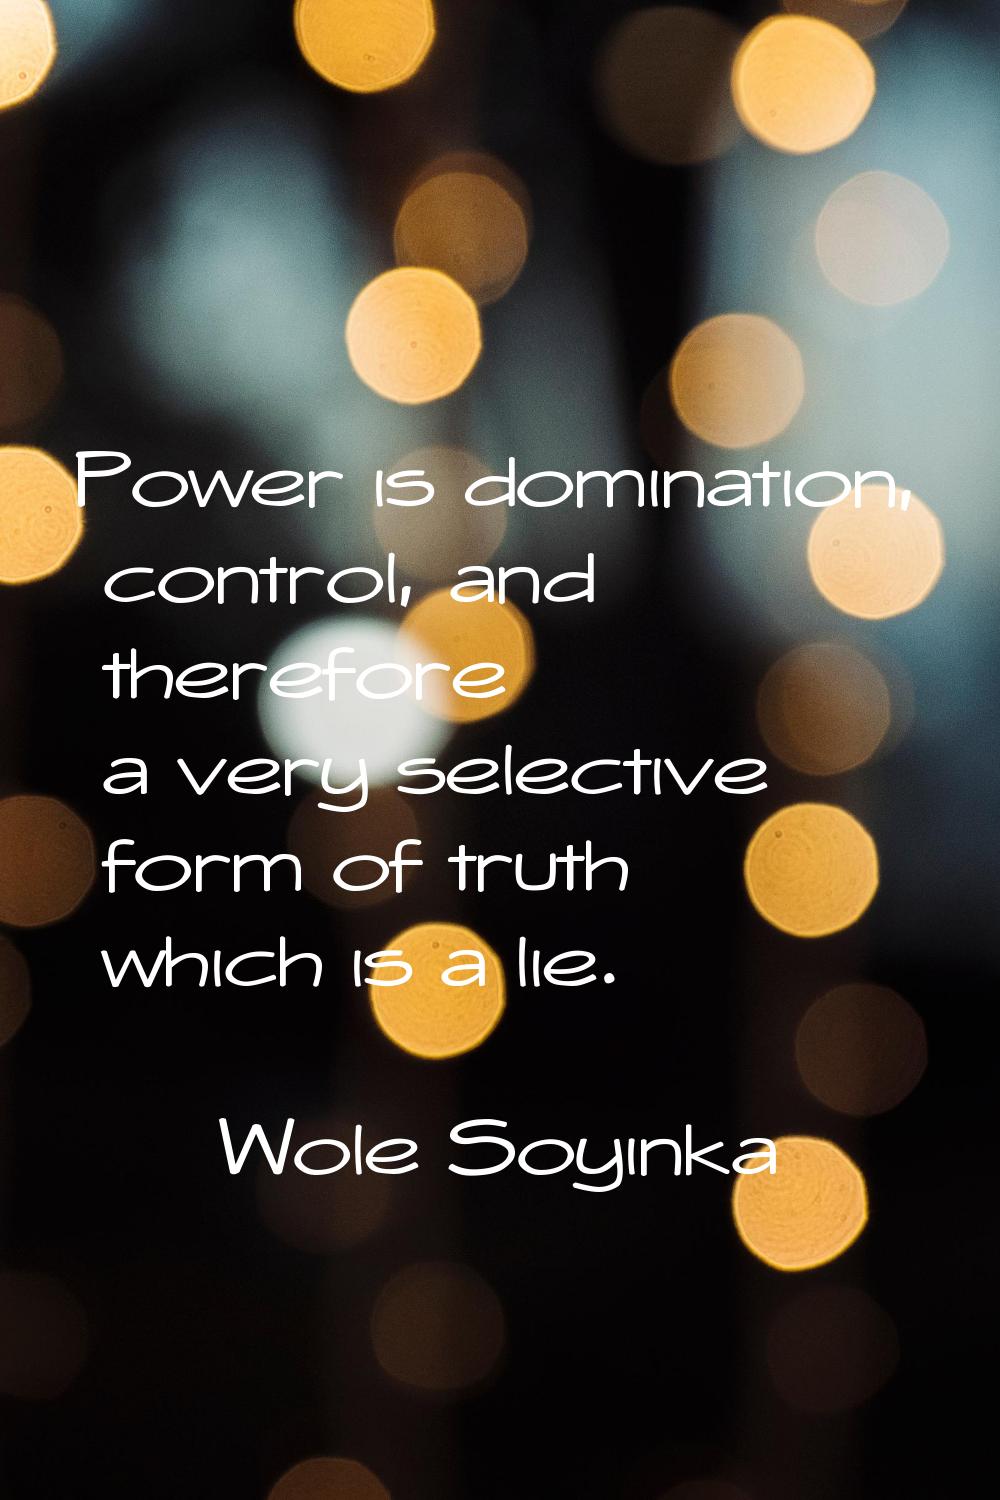 Power is domination, control, and therefore a very selective form of truth which is a lie.